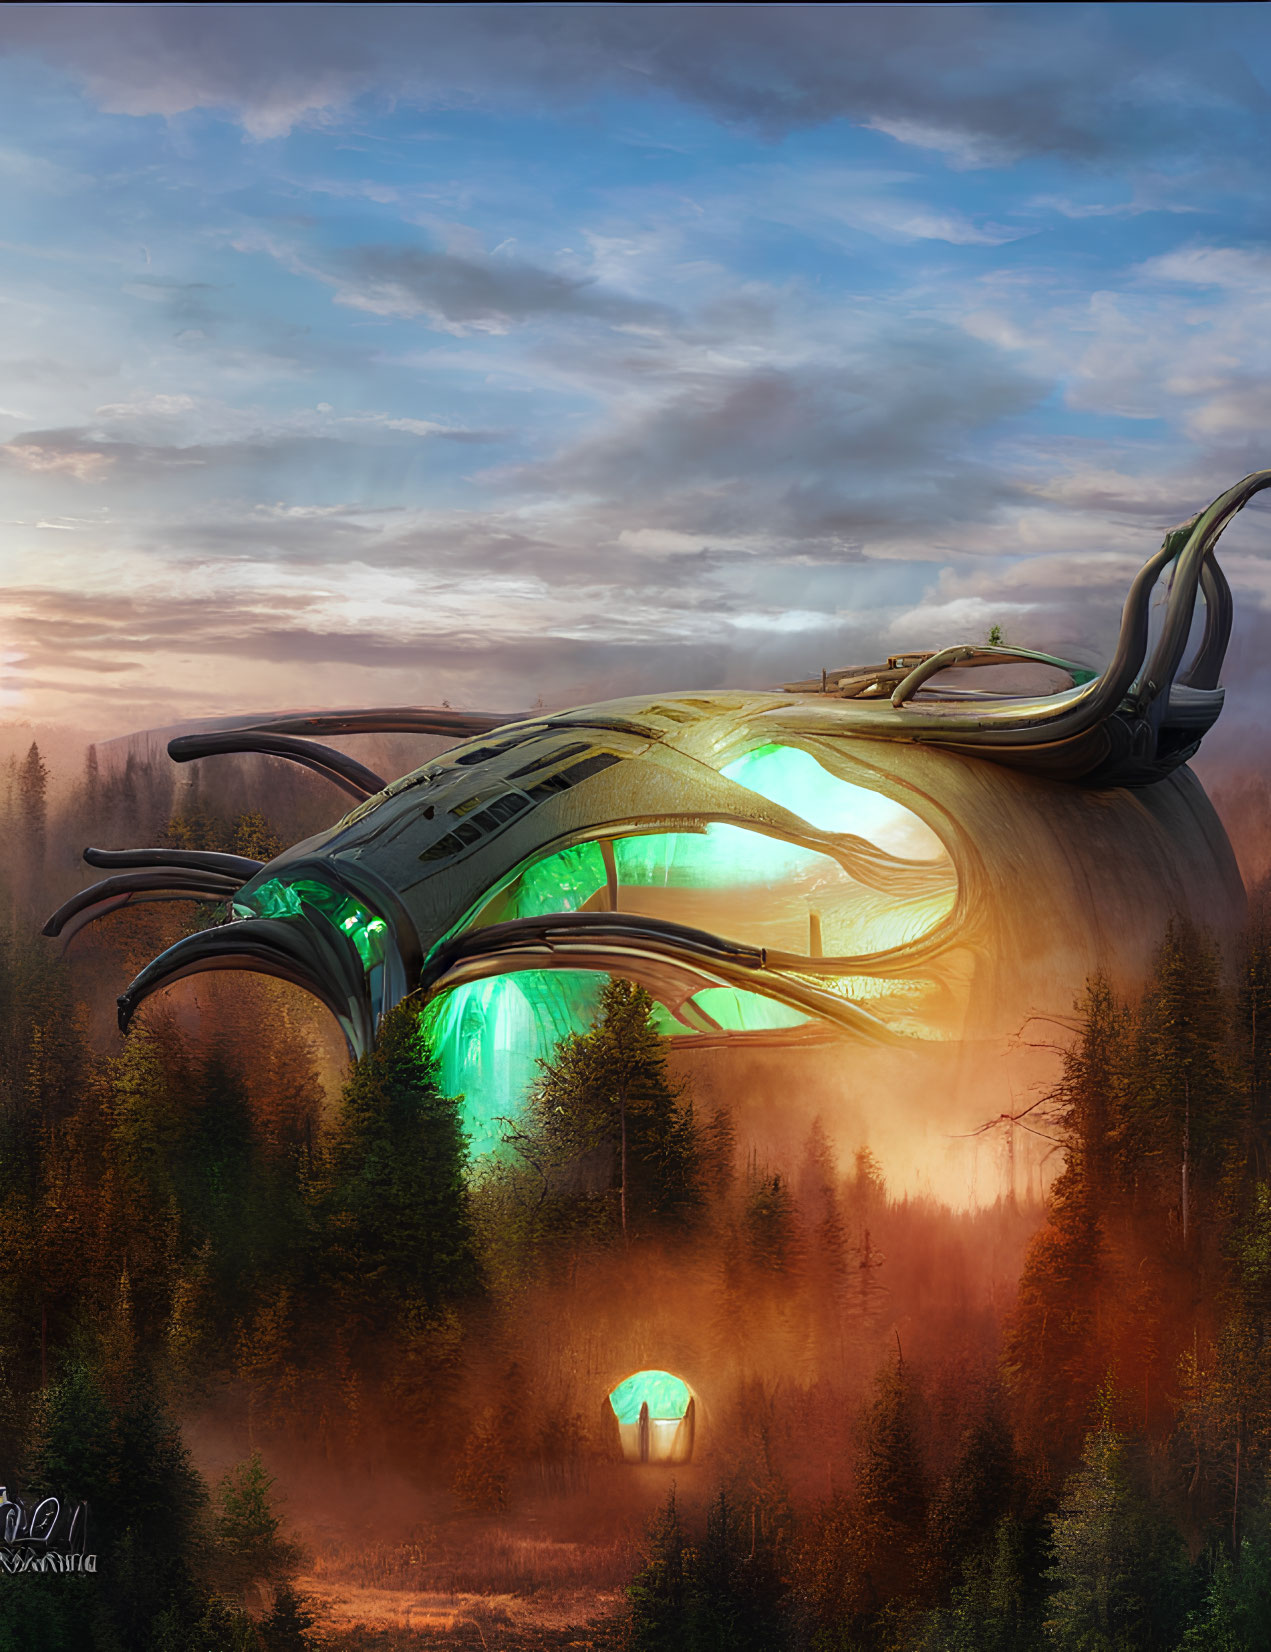 Futuristic organic structure with green lights in misty forest